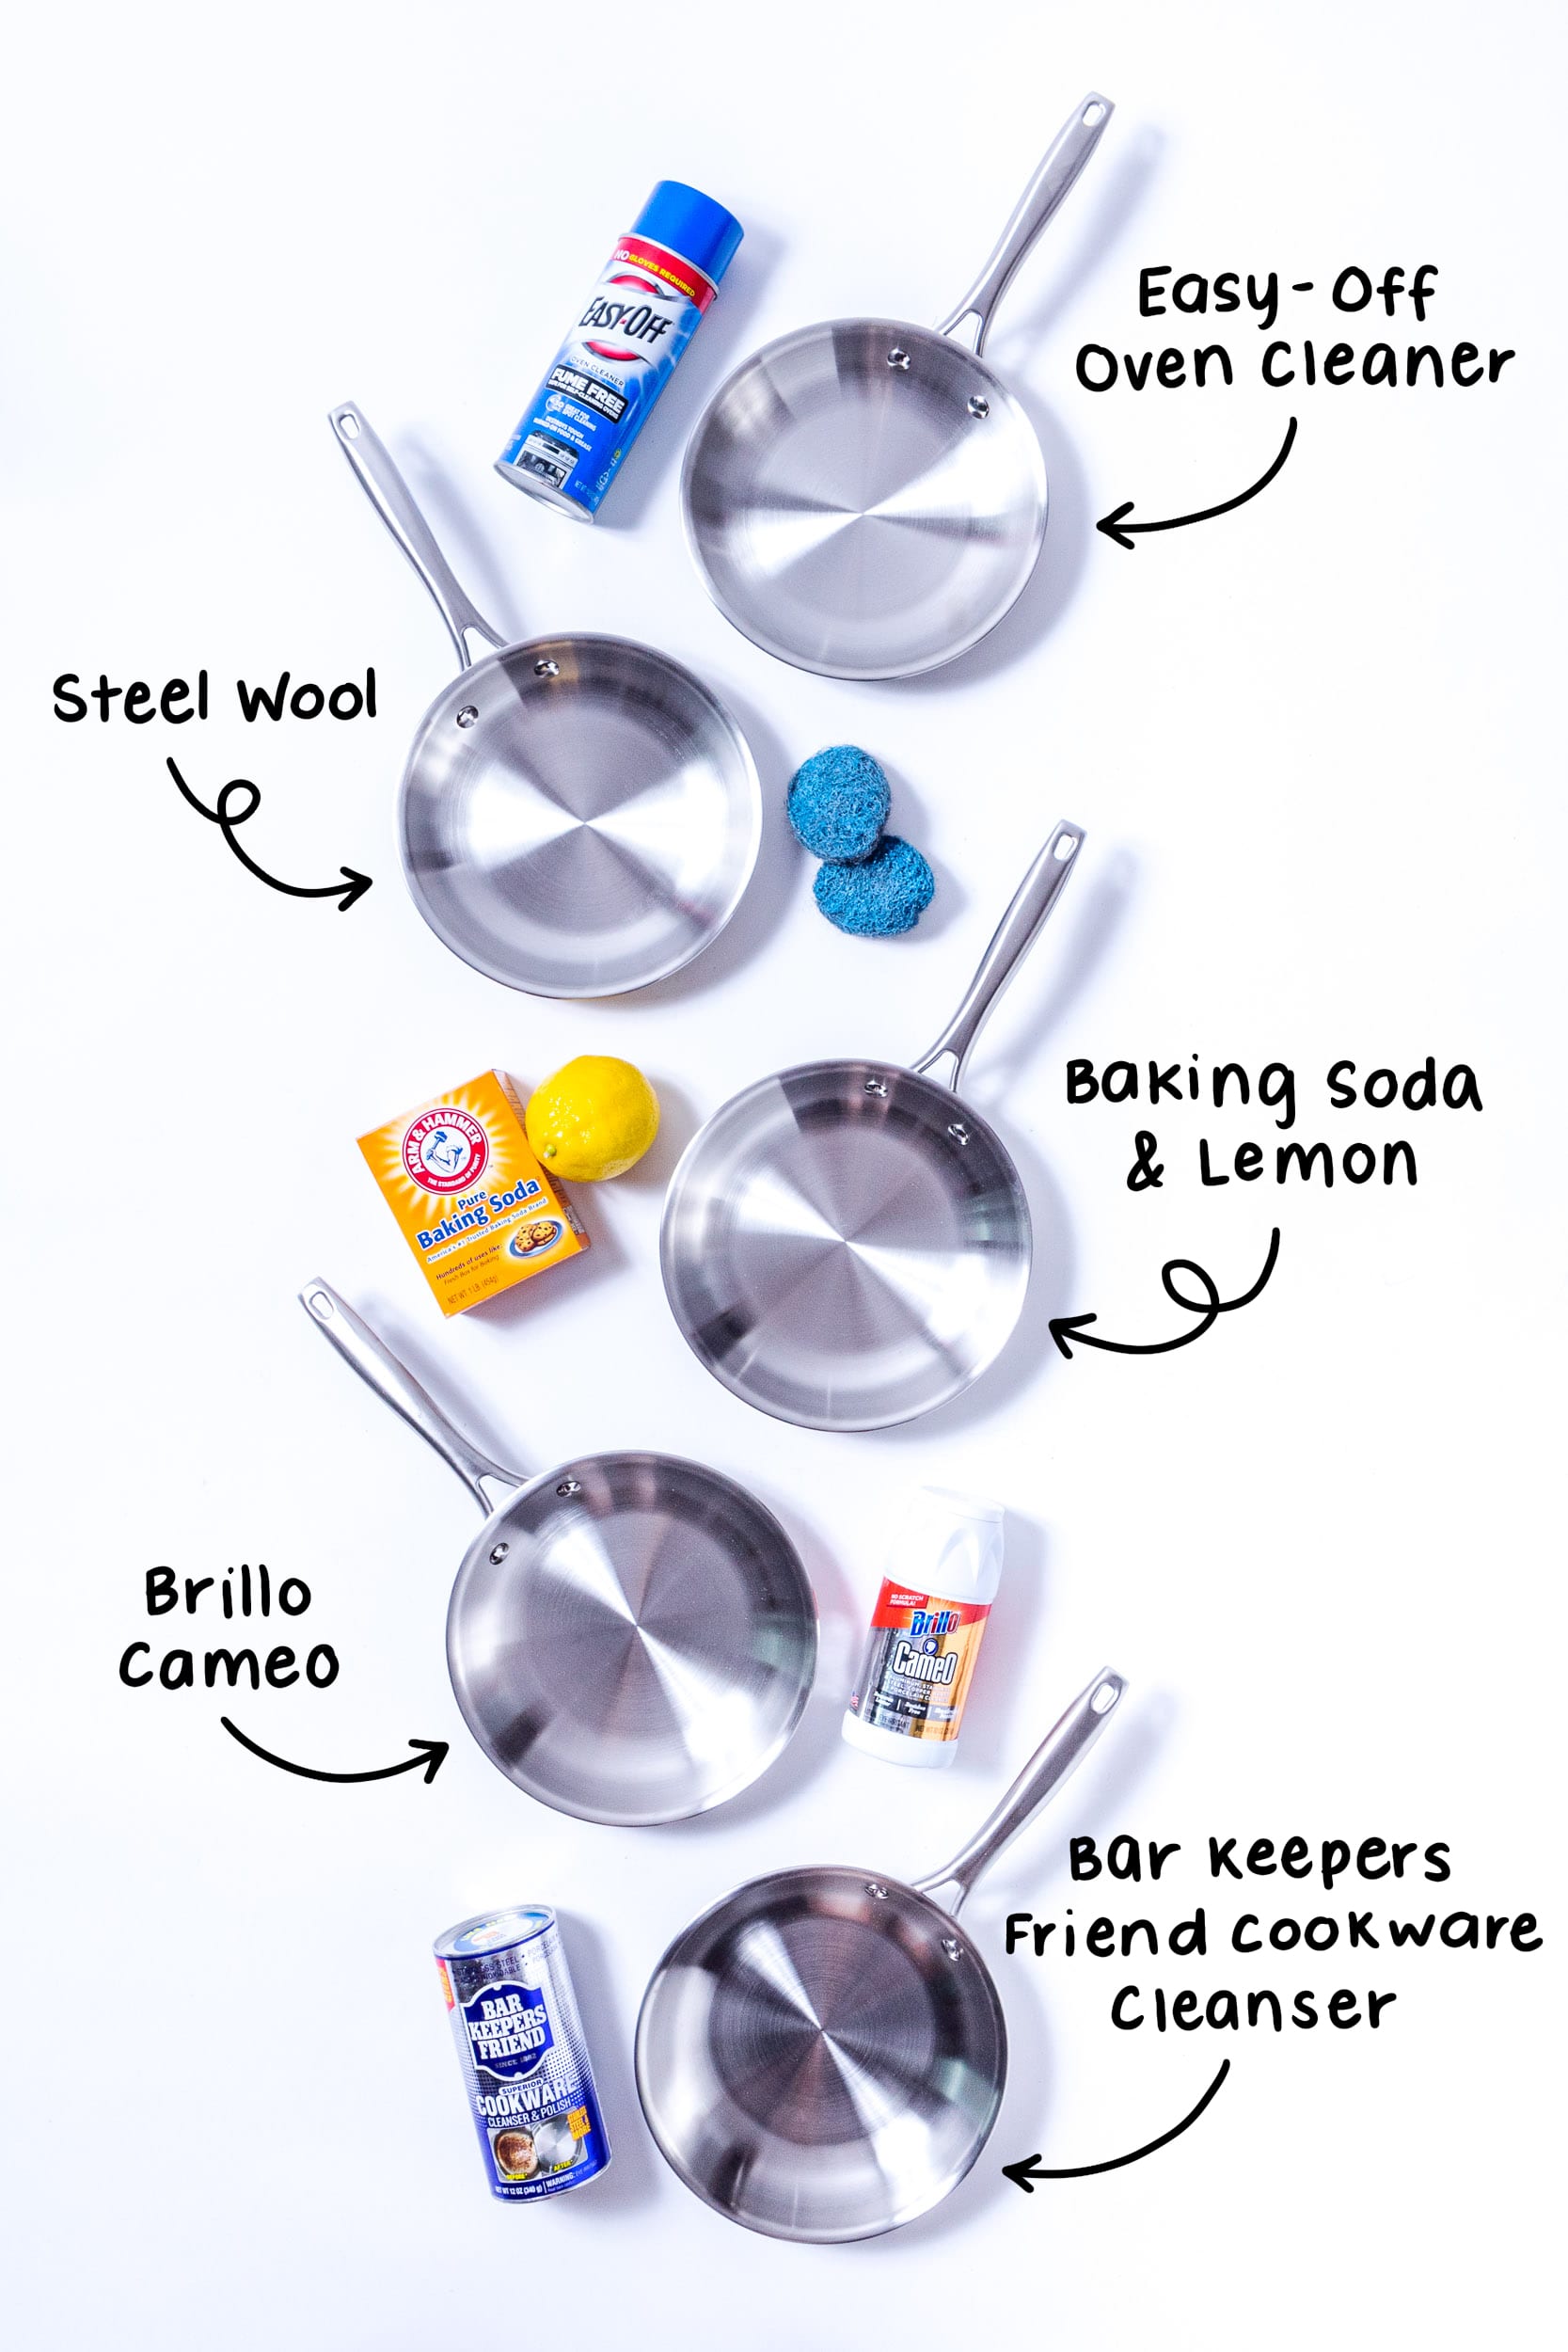 We Tried 5 Methods for Cleaning Discolored Stainless Steel Pans ...